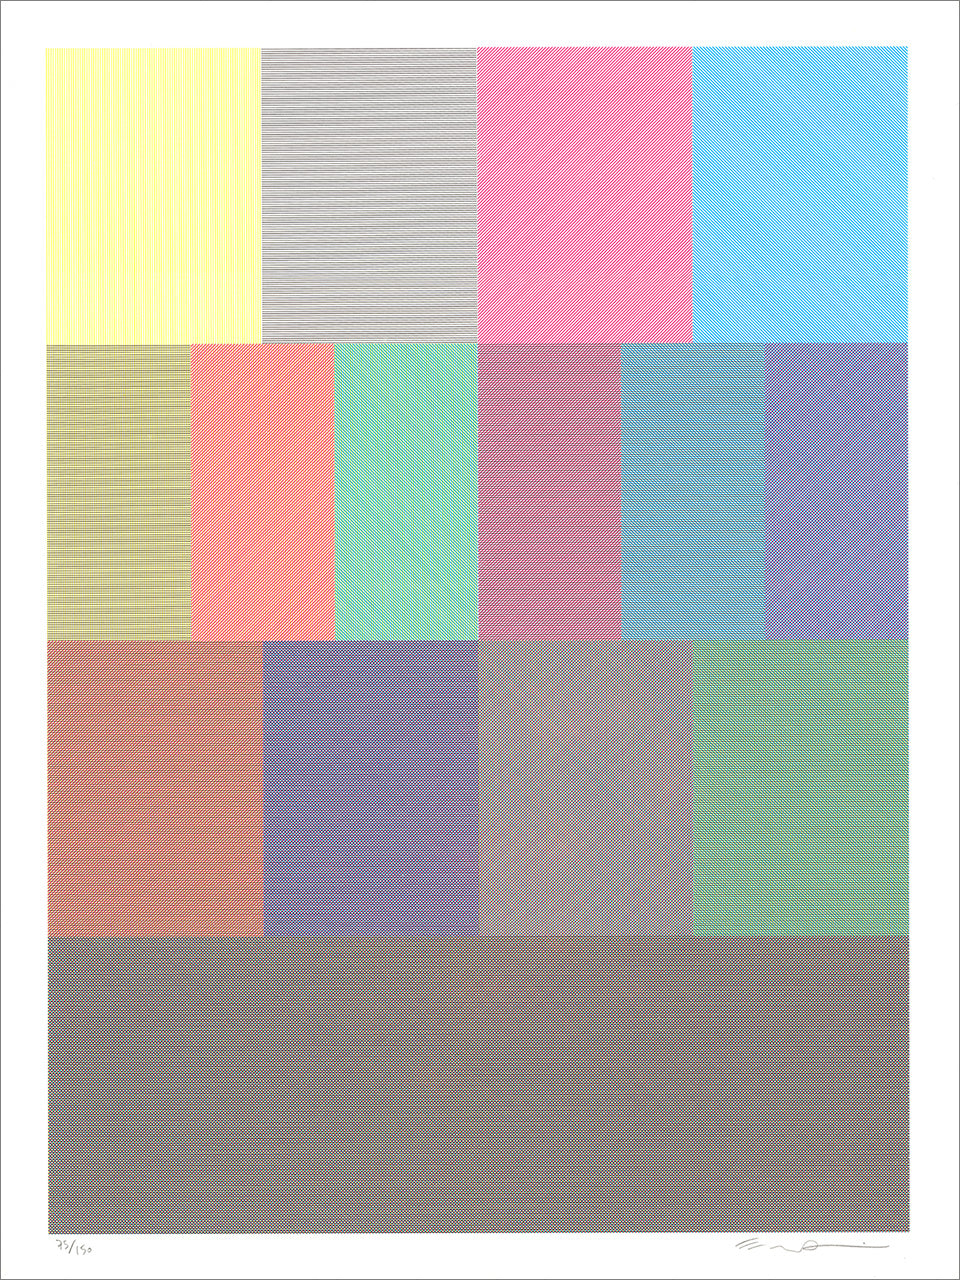 Eric Doeringer: Lines, Colors, and Their Combinations